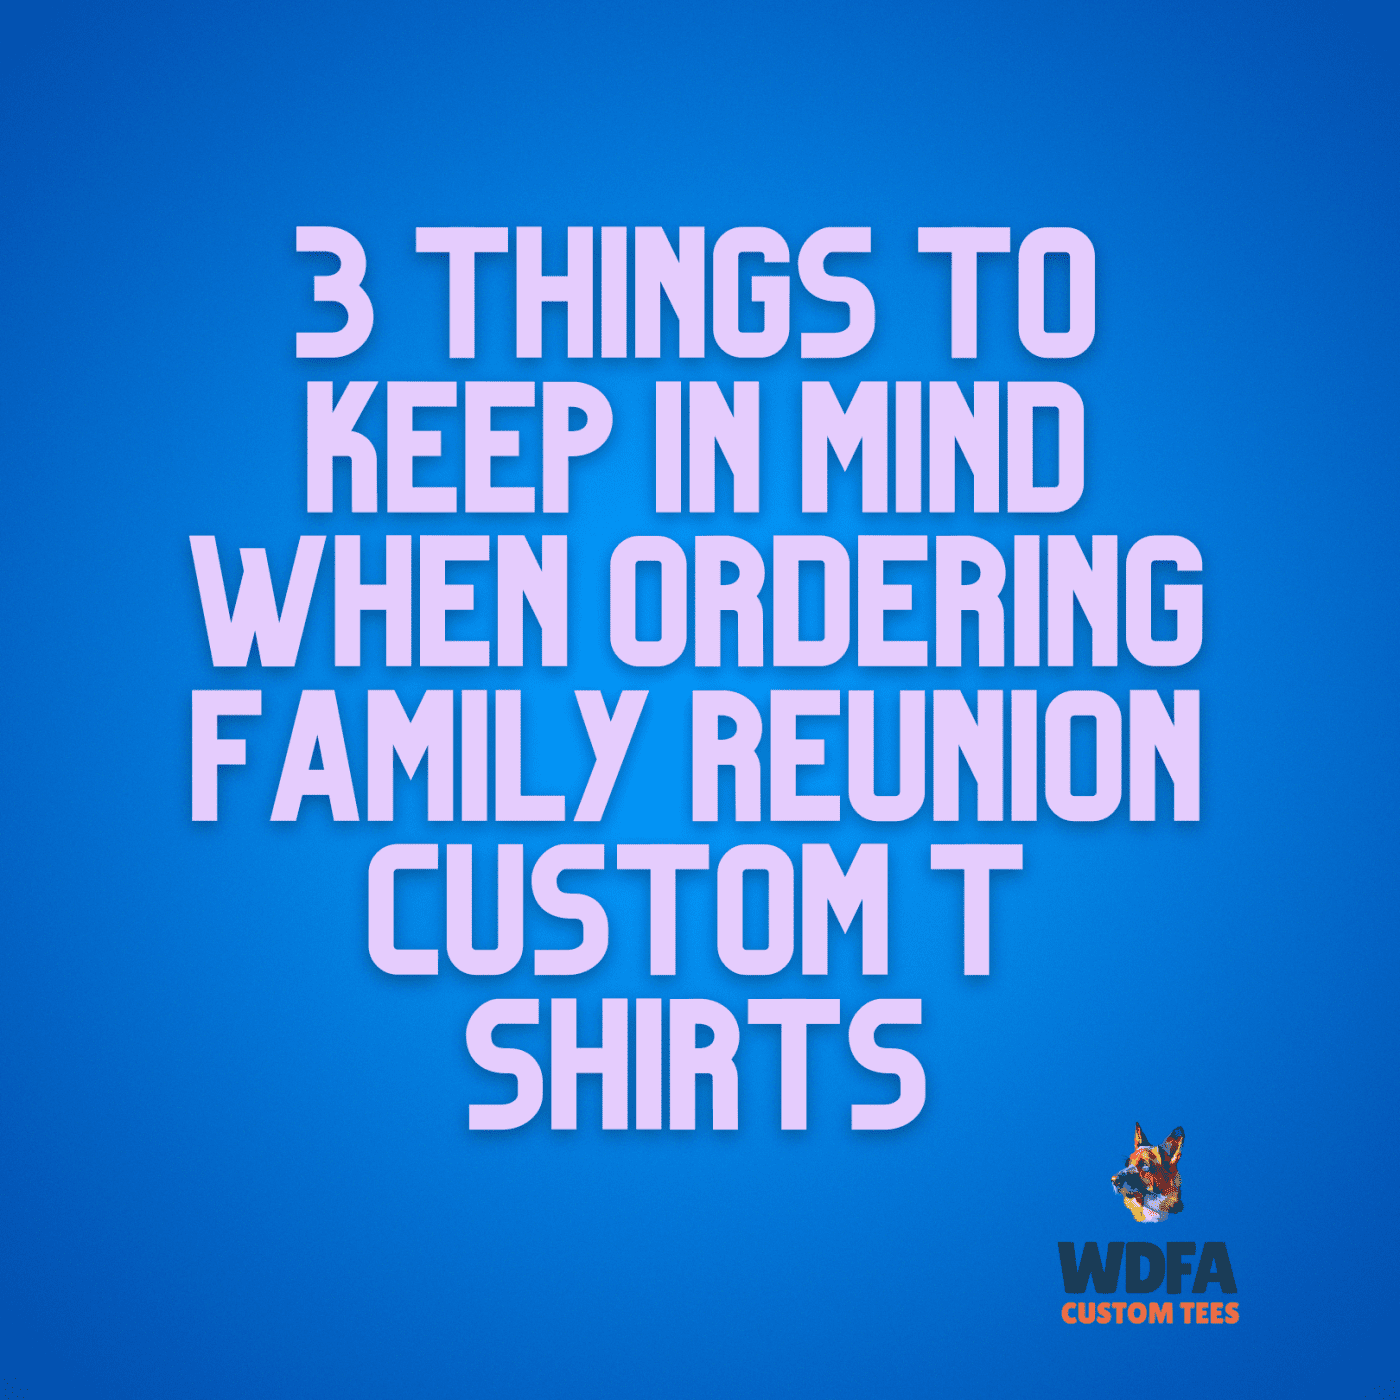 3 Things To Keep In Mind When Ordering Family Reunion Custom T Shirts, custom t shirts, t shirt printing, tshirt printing